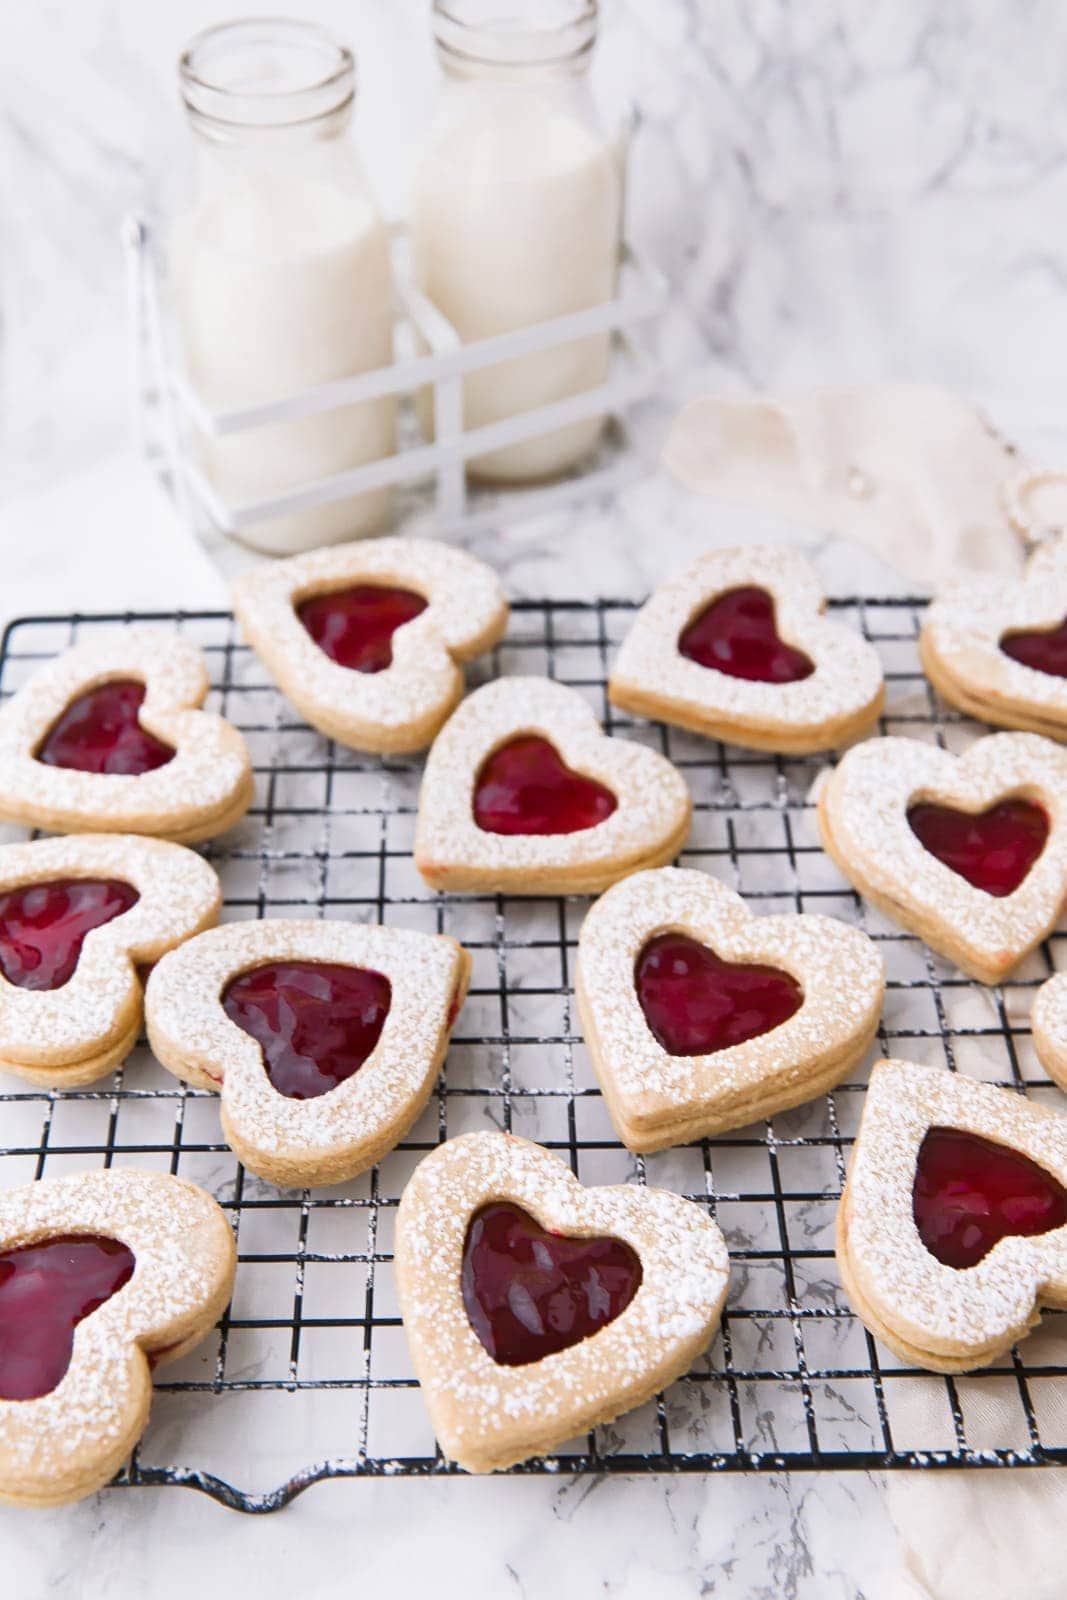 Say I love you to someone sweet with these perfectly soft Cherry Linzer cookies.